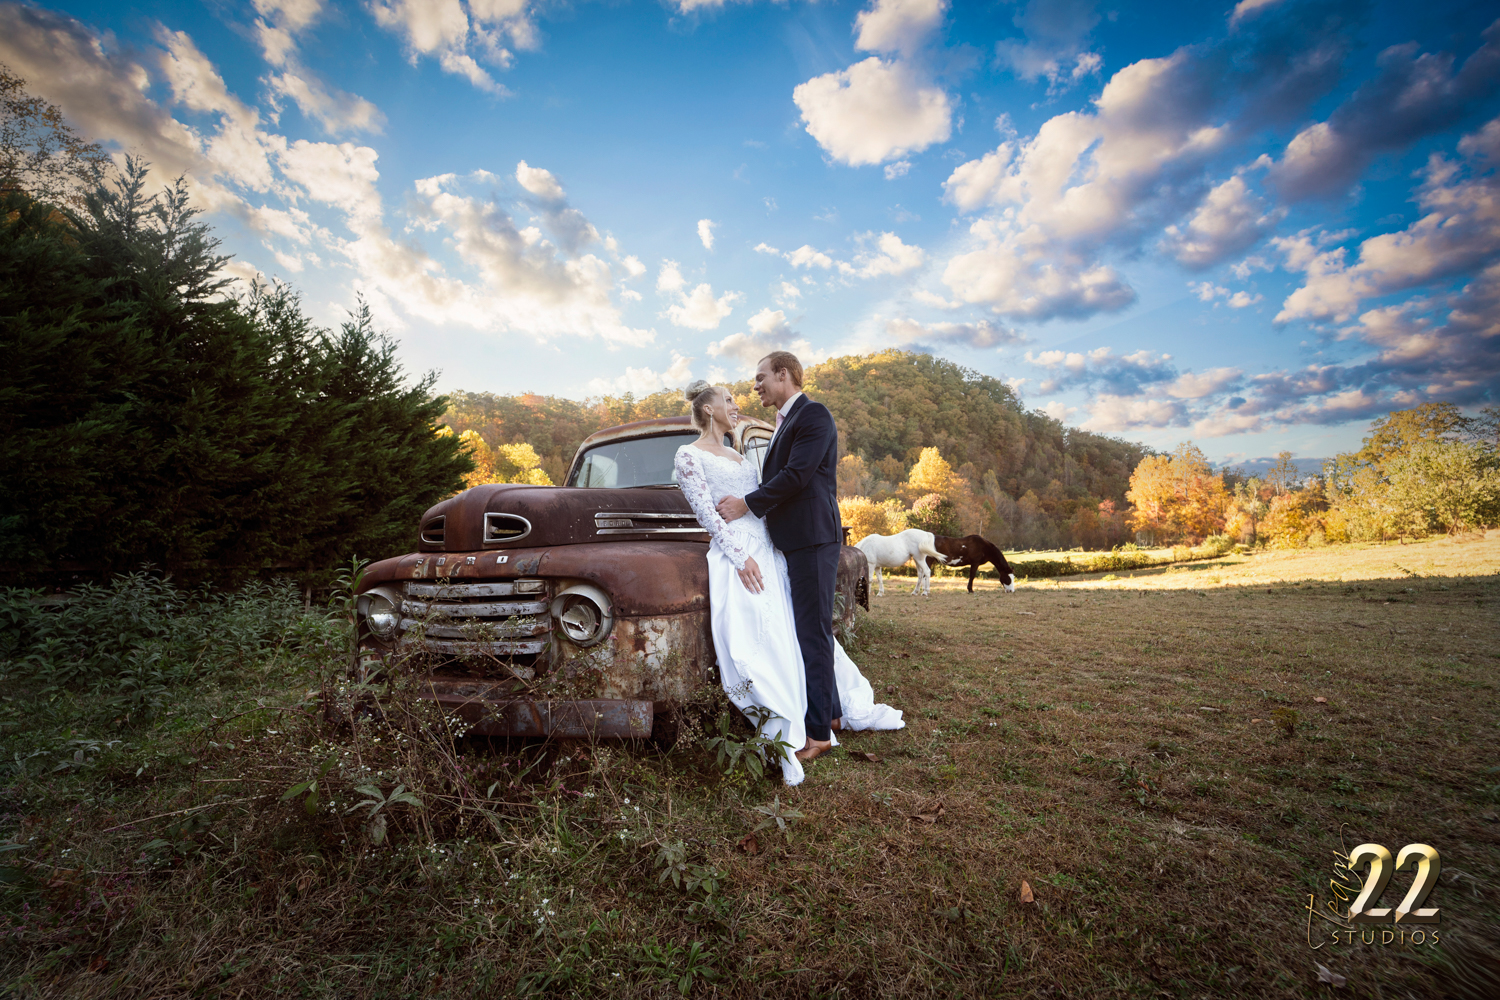 Wedding couple at a 1950 Ford truck with a vibrant blue sky and horses in the field next to them